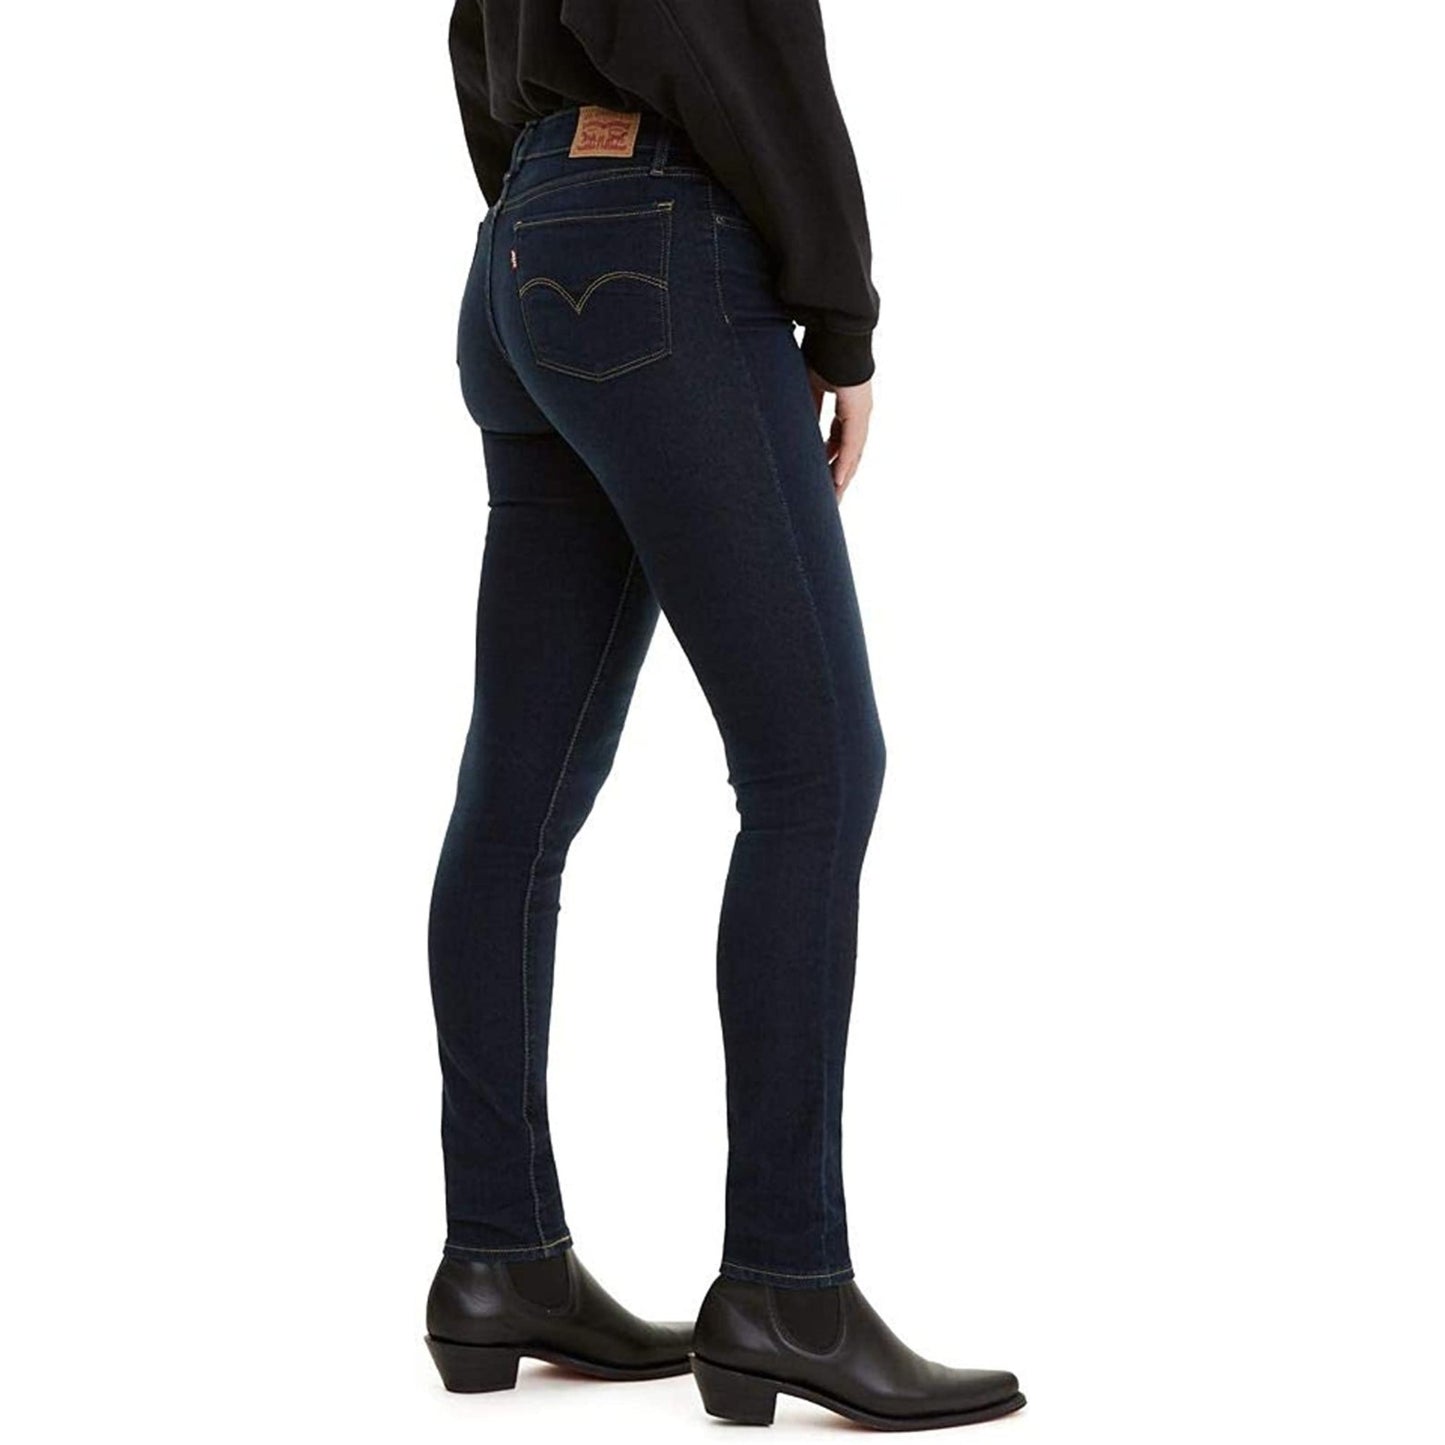 LEVI'S 711 Skinny Jeans for Women - Cast Shadows (Size 26R)